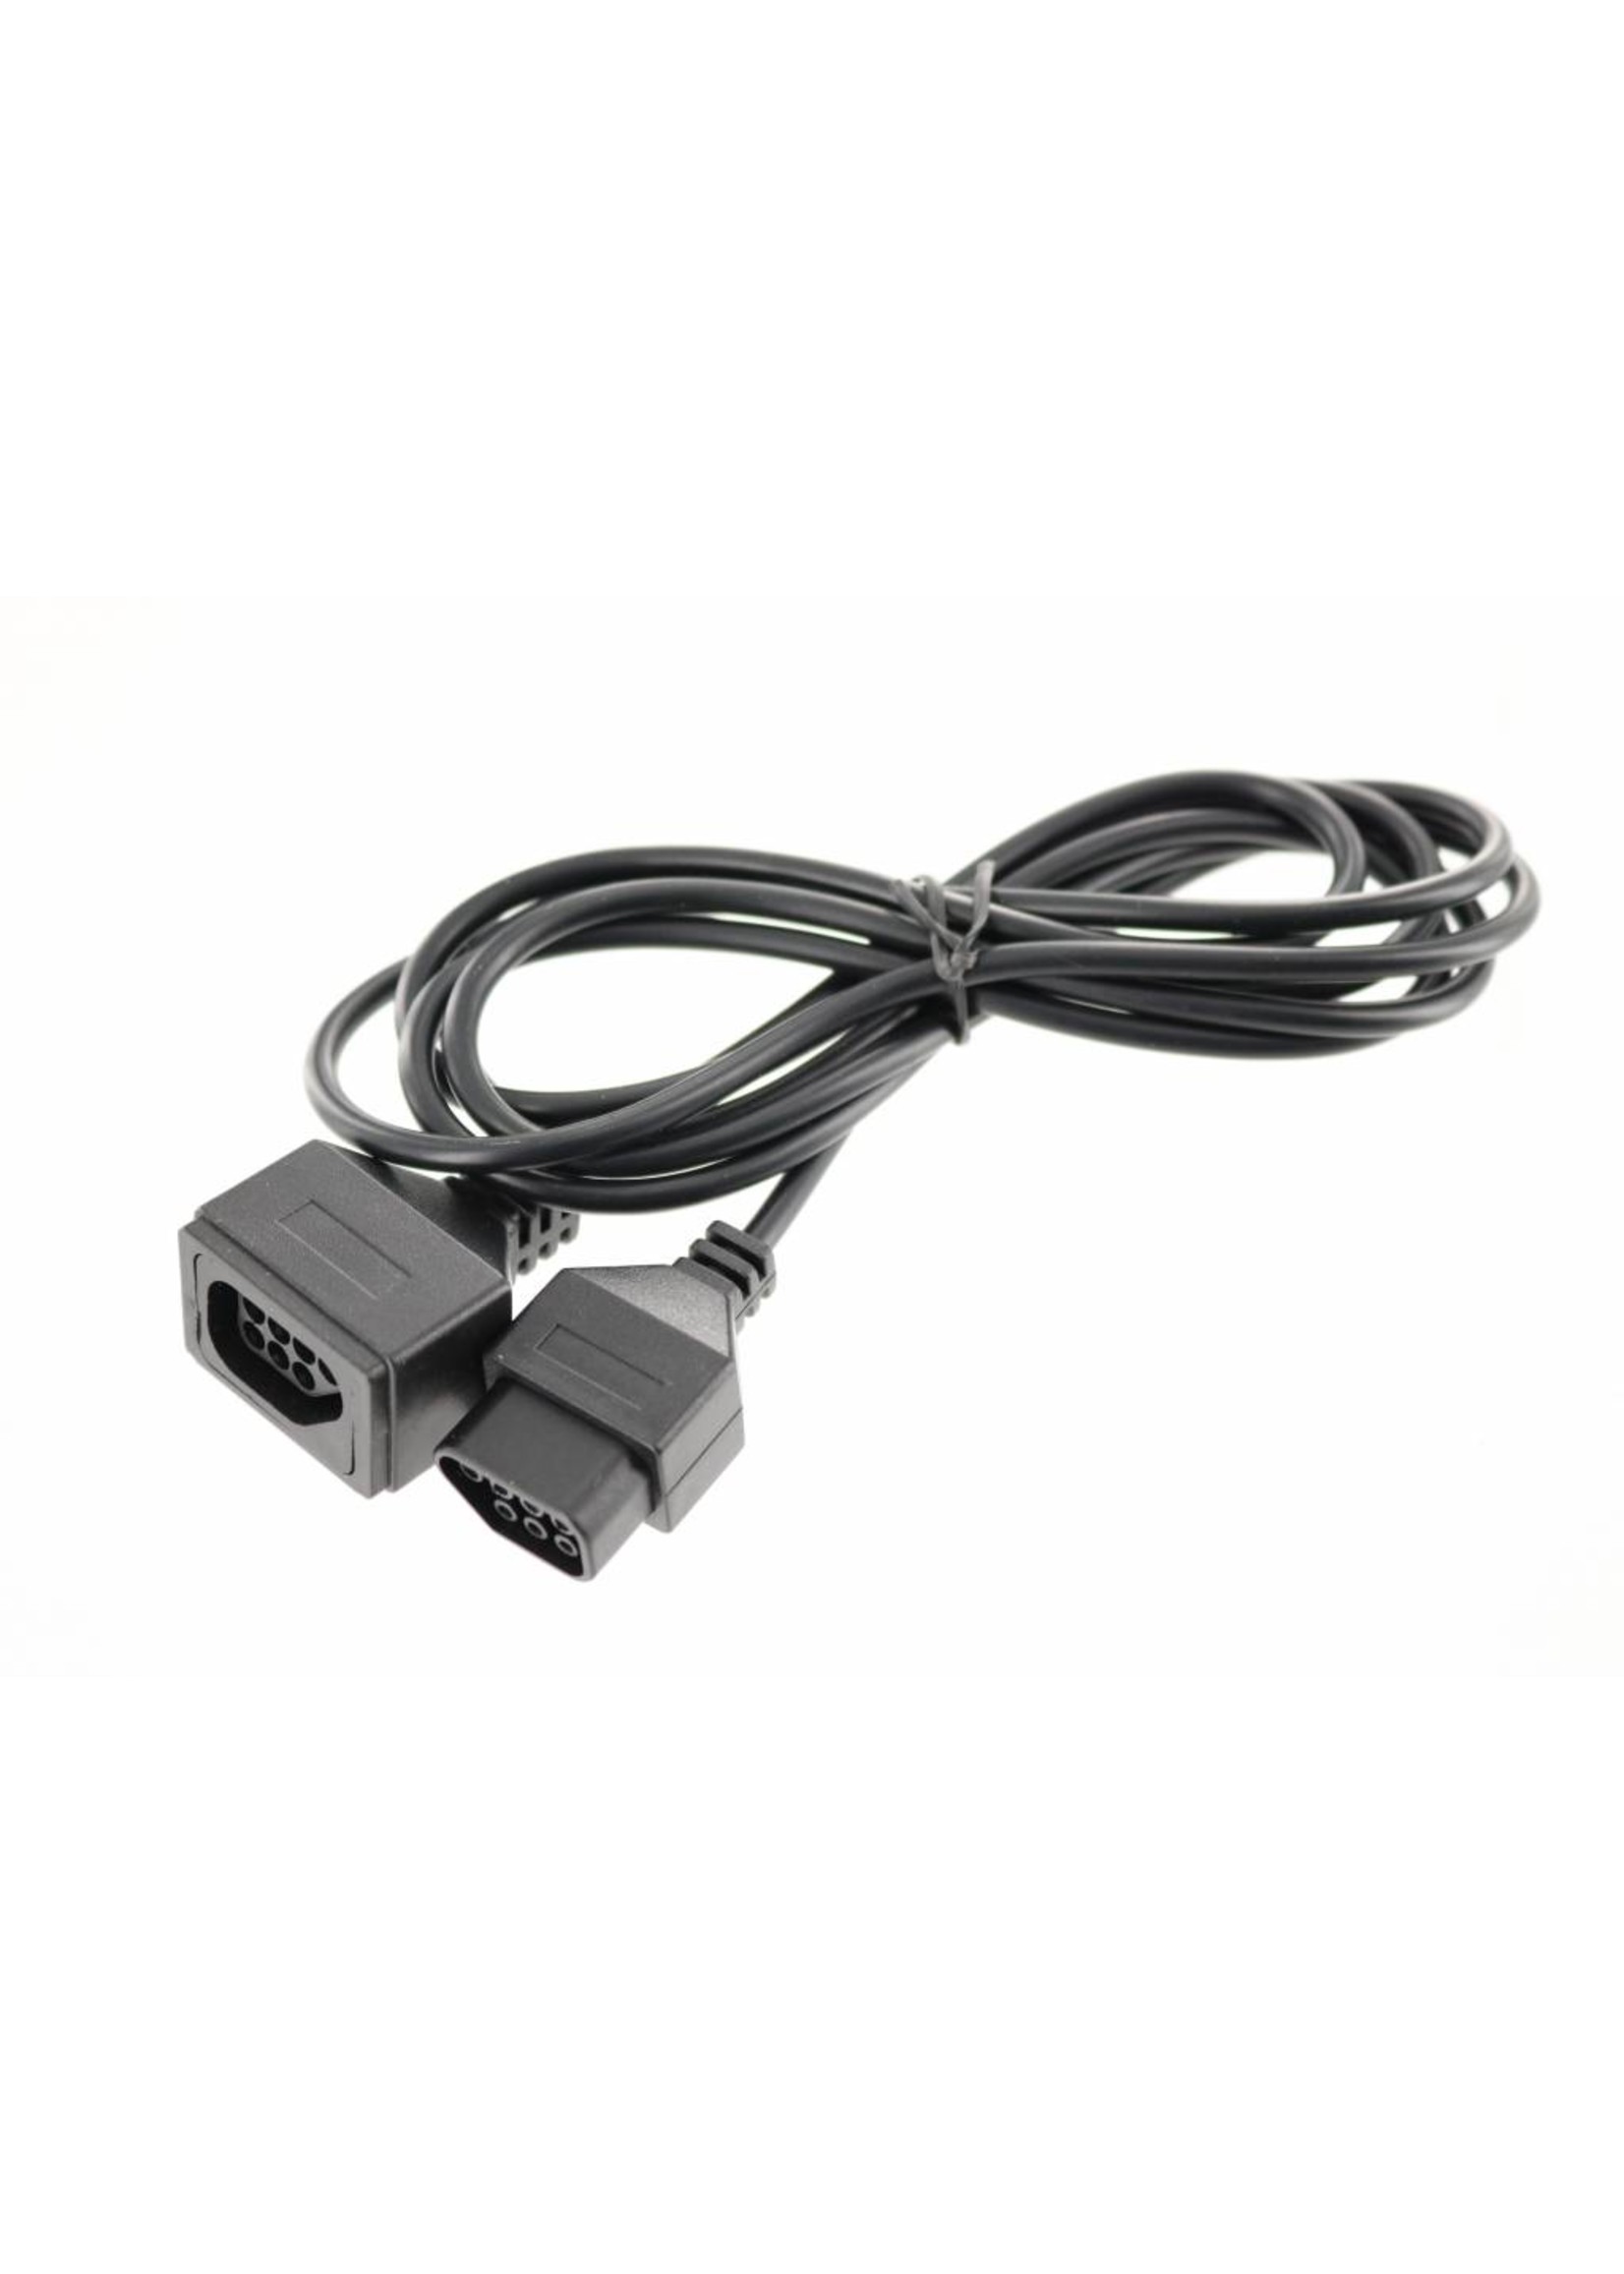 Extension cable 1.8m for NES Controller (8bit)